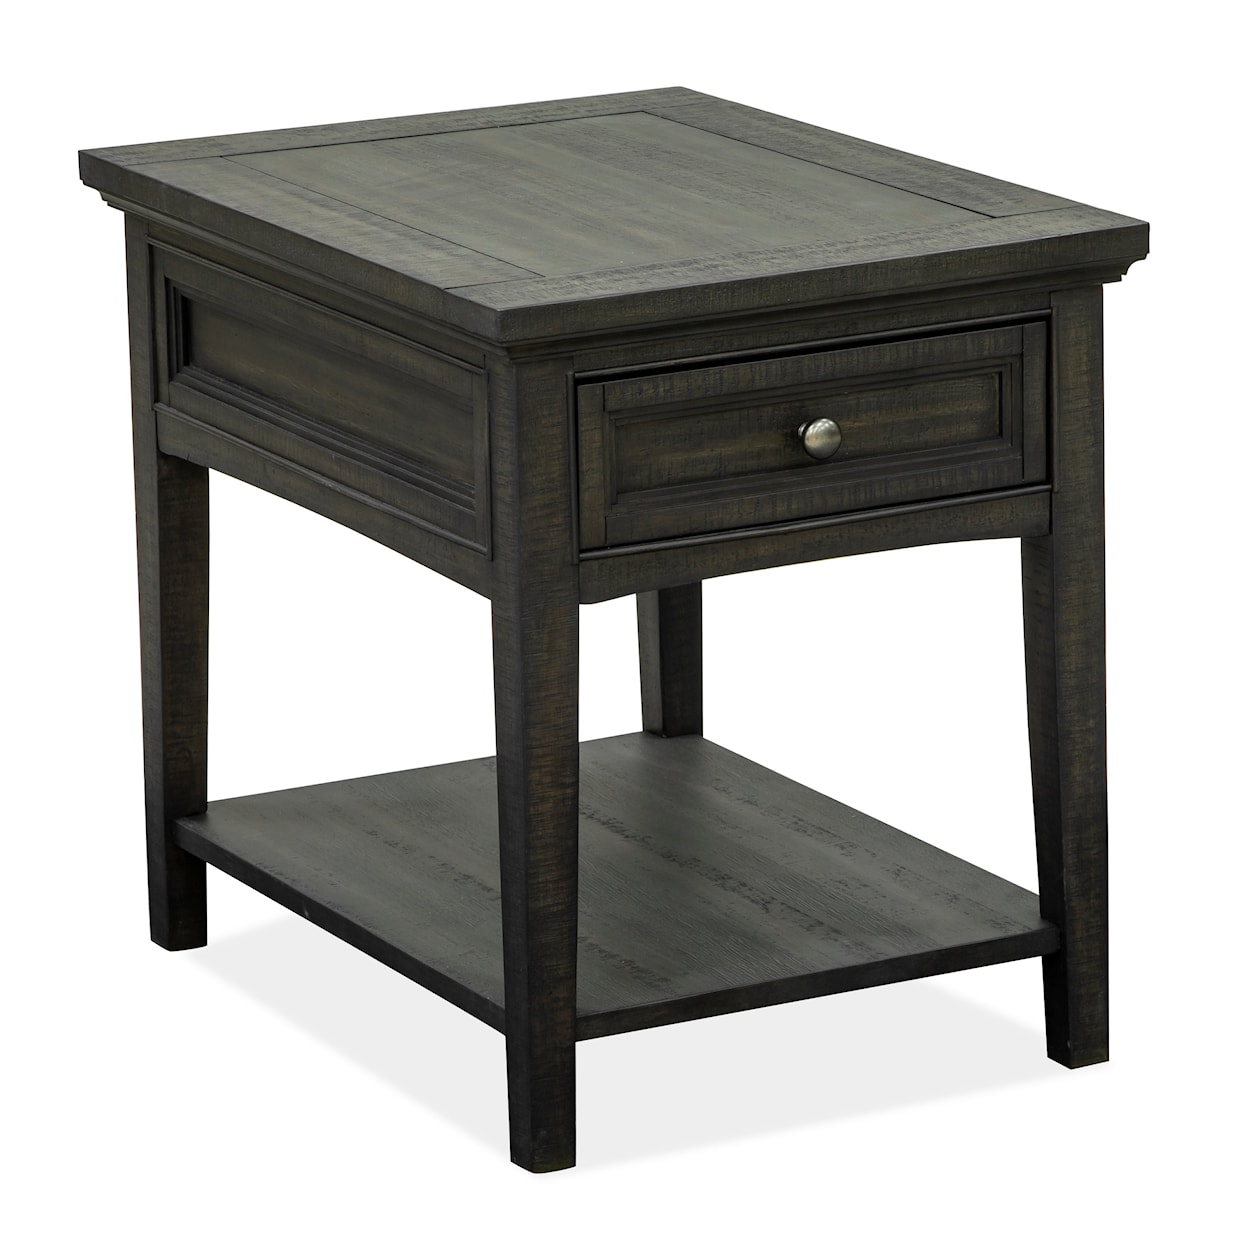 Magnussen Home Westley Falls Occasional Tables Rectangular End Table